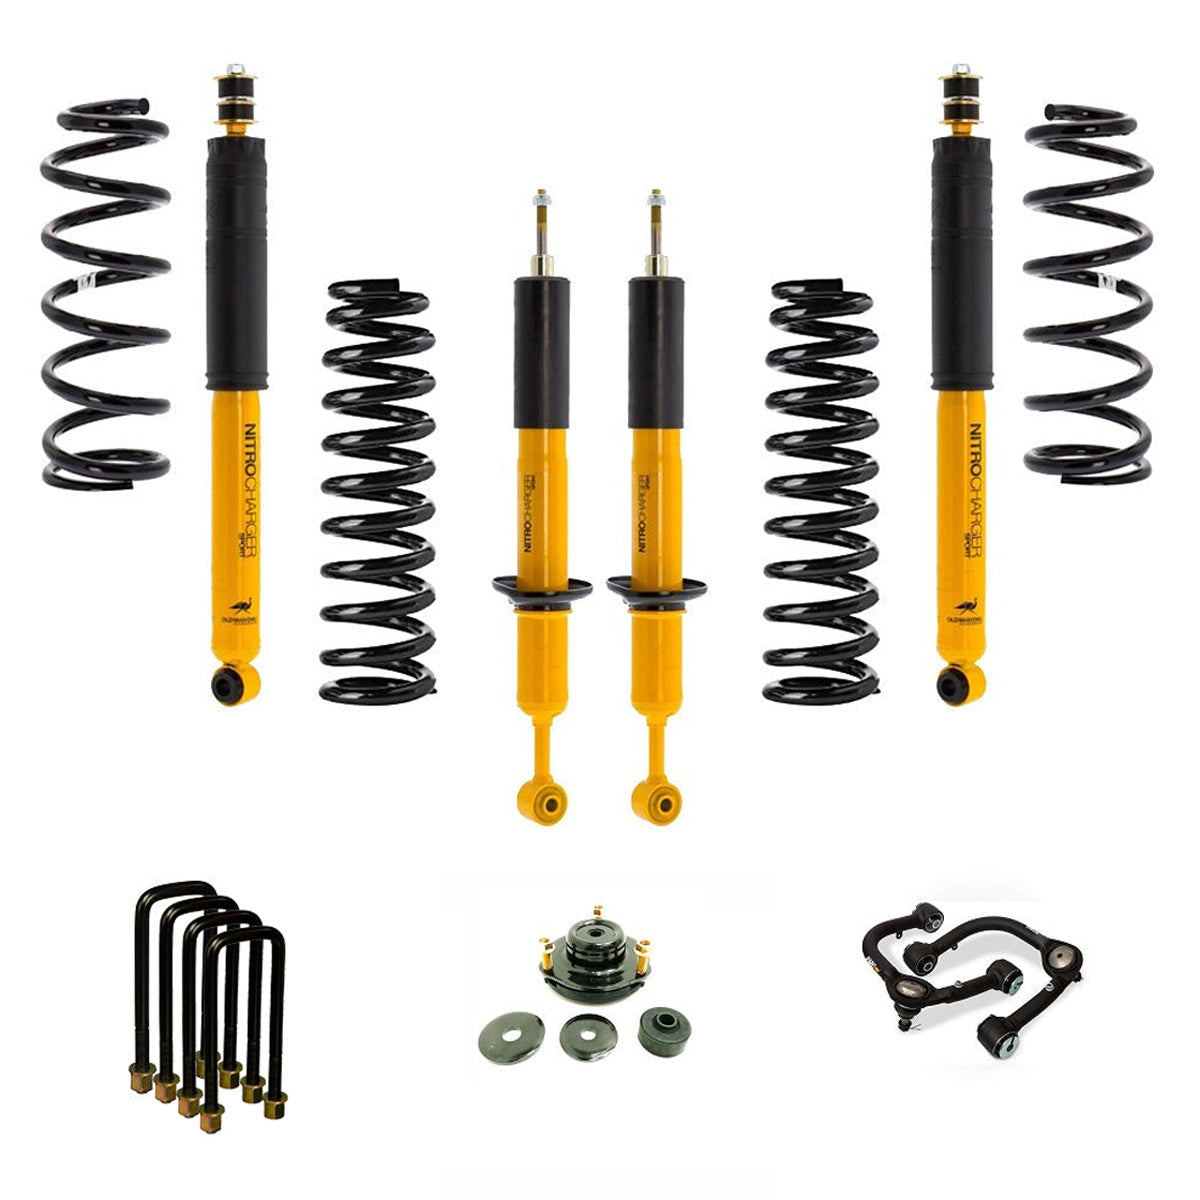 The OME 2.5 - 3 inch Essentials Lift Kit for Hilux Revo, Rocco, SR5 (15-22) - Front Shocks Assembly by Old Man Emu suspension system provides increased ground clearance with the help of Nitrocharger shocks.